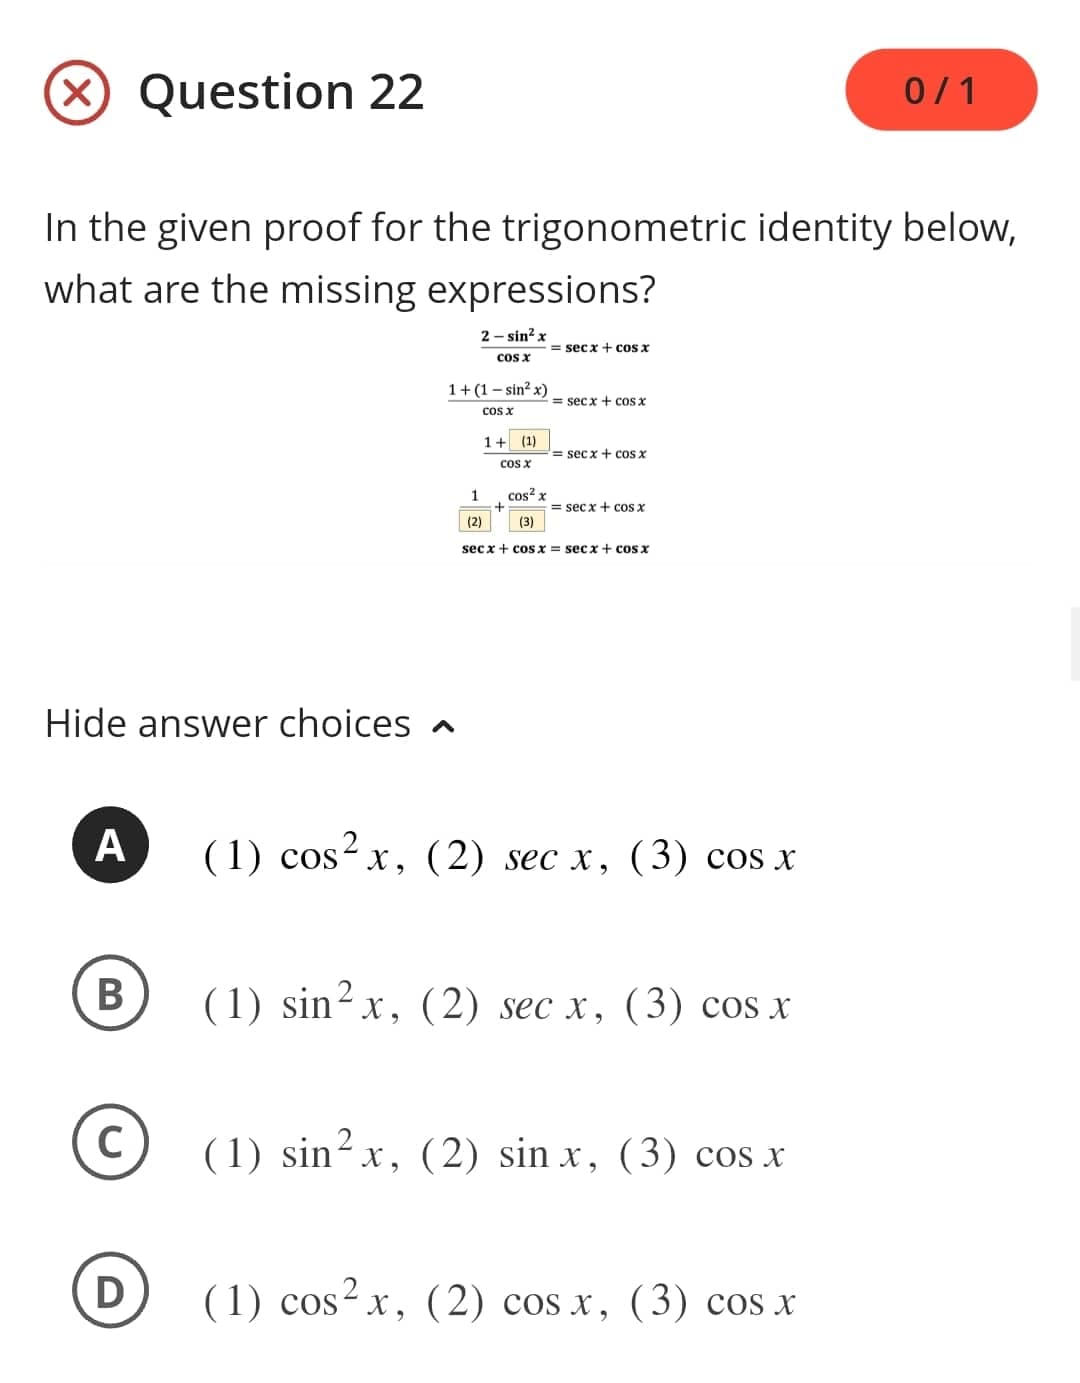 In the given proof for the trigonometric identity below,
what are the missing expressions?
2-sin² x
cos x
Hide answer choices
A
B
Question 22
C
D
1+(1-sin²x)
COS X
1
(2)
1+ (1)
cos x
+
cos² x
(3)
= secx + cos x
= secx + cos x
= secx + cos x
=secx + cos x
secx+cosx = secx + cos x
(1) cos²x, (2) sec x, (3) cos x
(1) sin²x, (2) sec x, (3) cos x
(1) sin²x, (2) sinx, (3) cos x
0/1
(1) cos²x, (2) cos x, (3) cos x